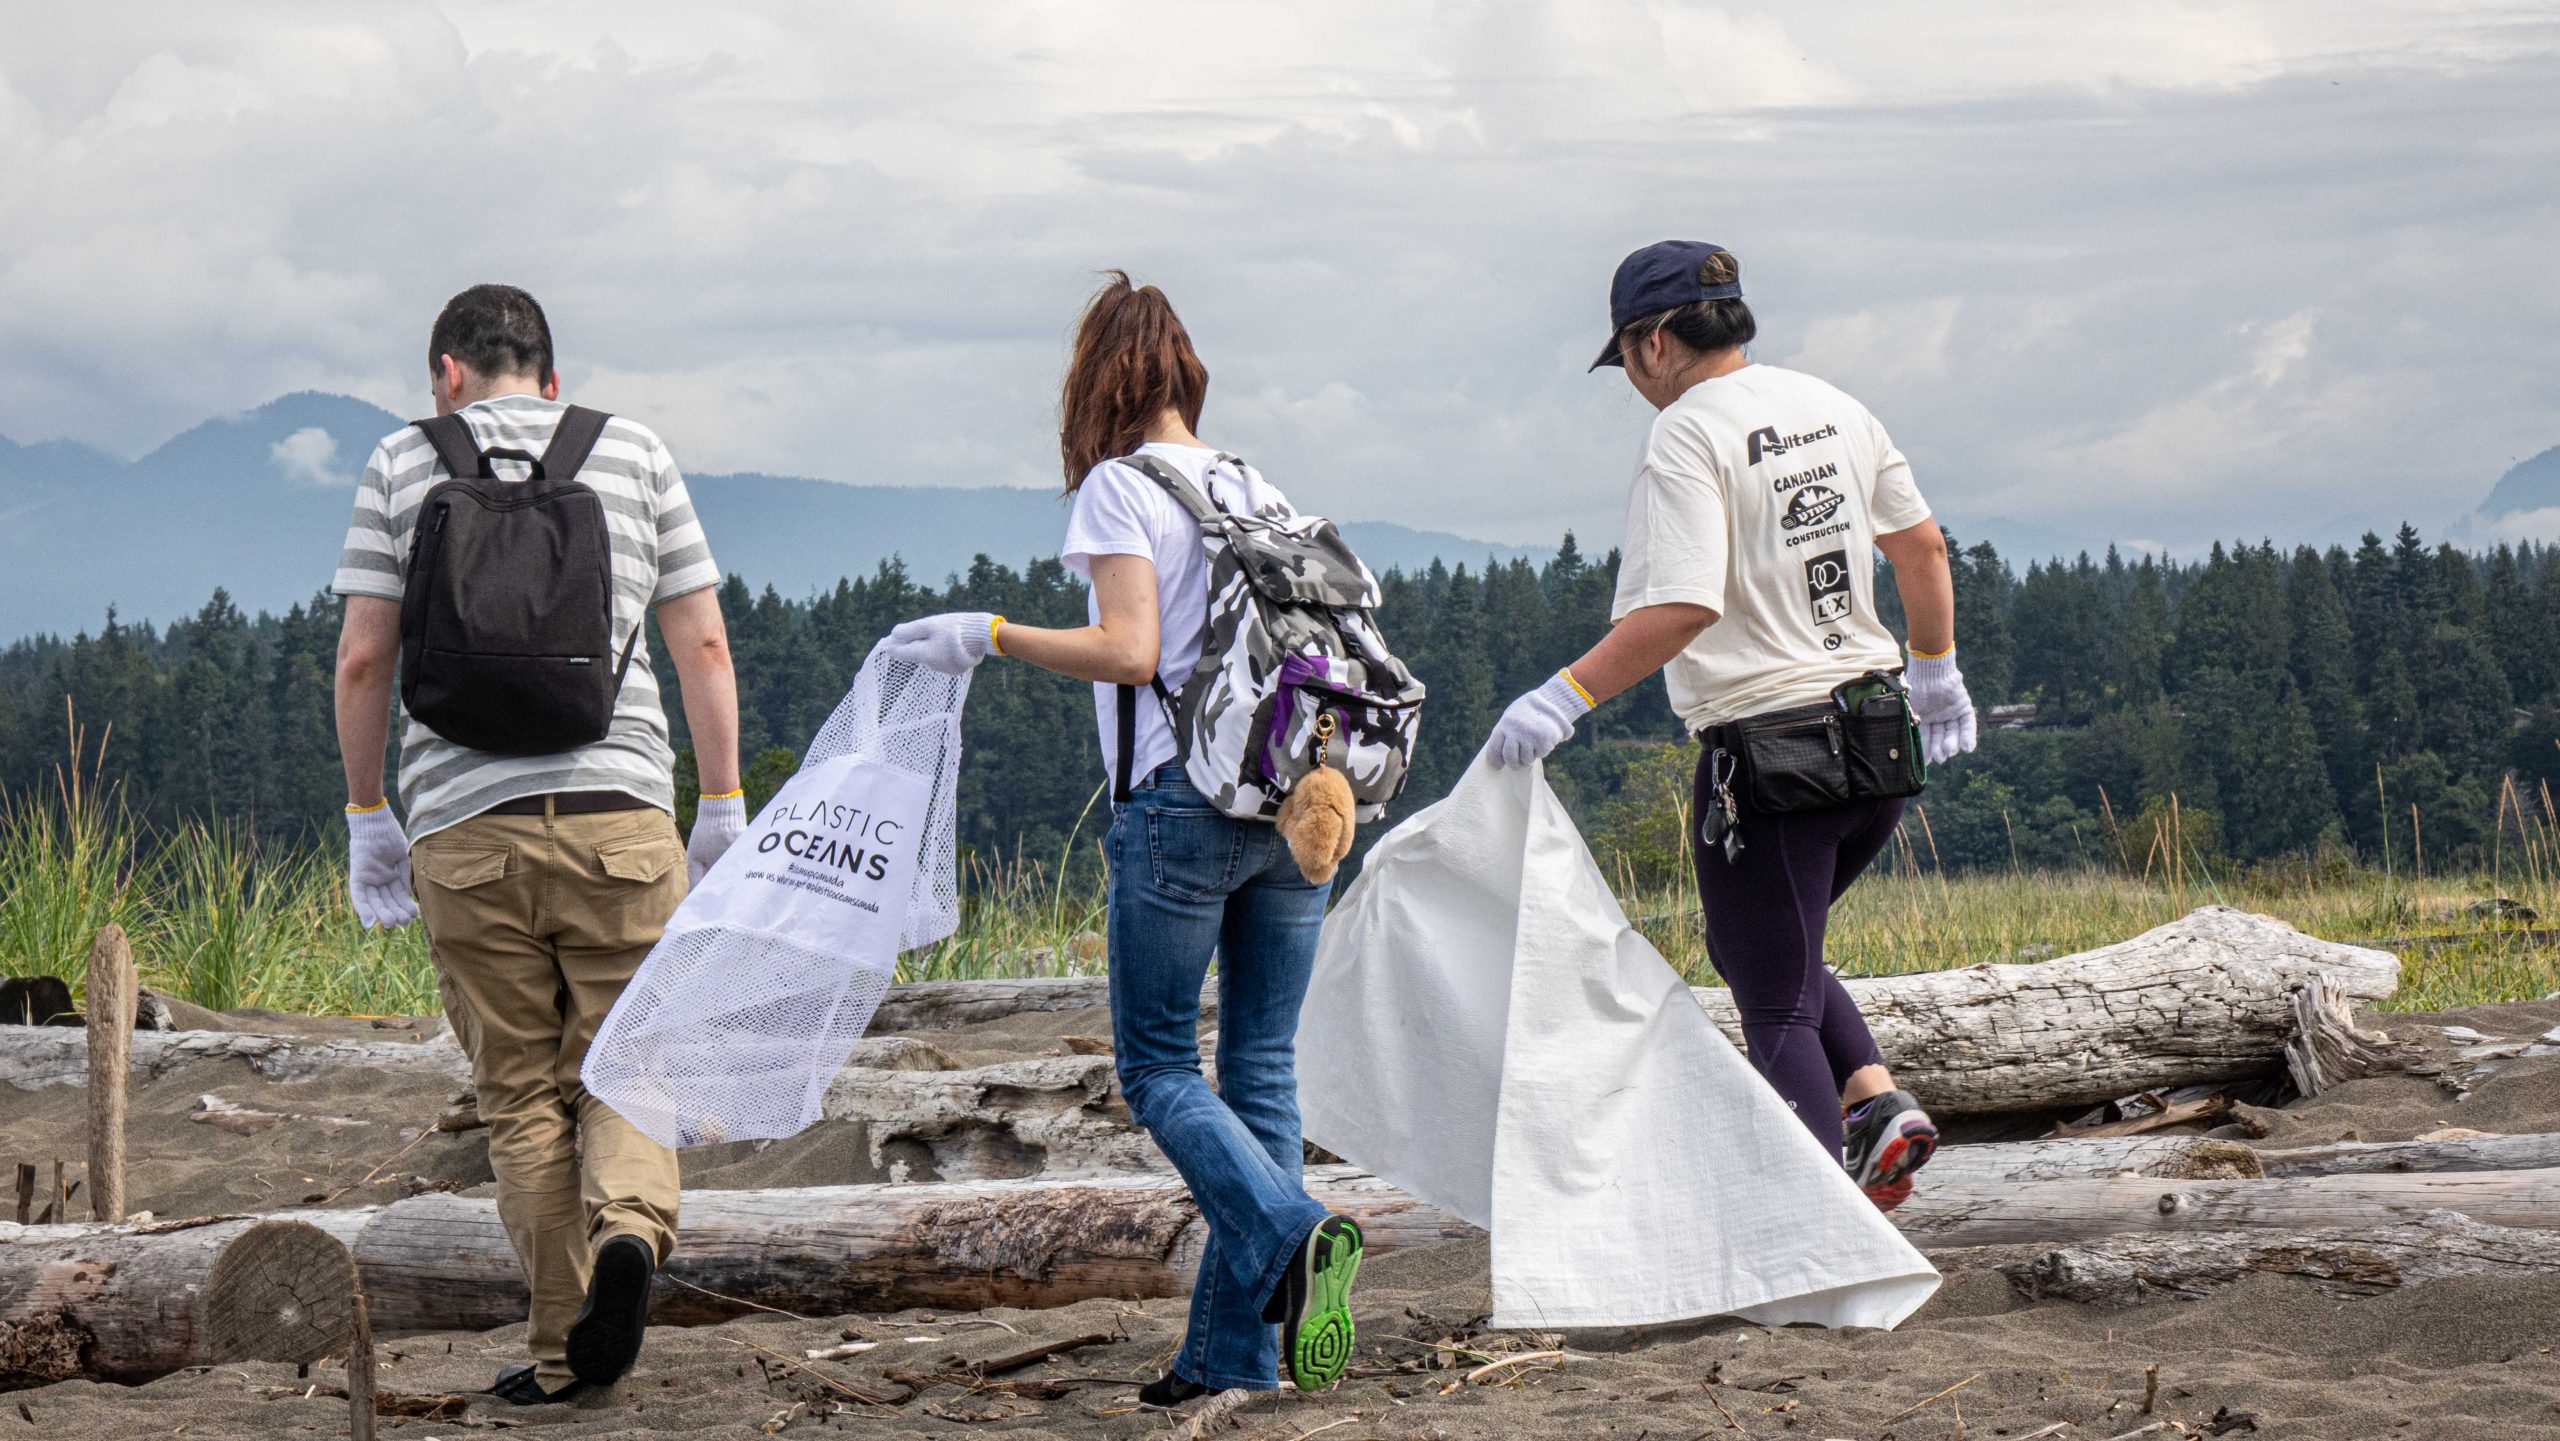 Volunteers at a Plastic Oceans Canada Cleanup